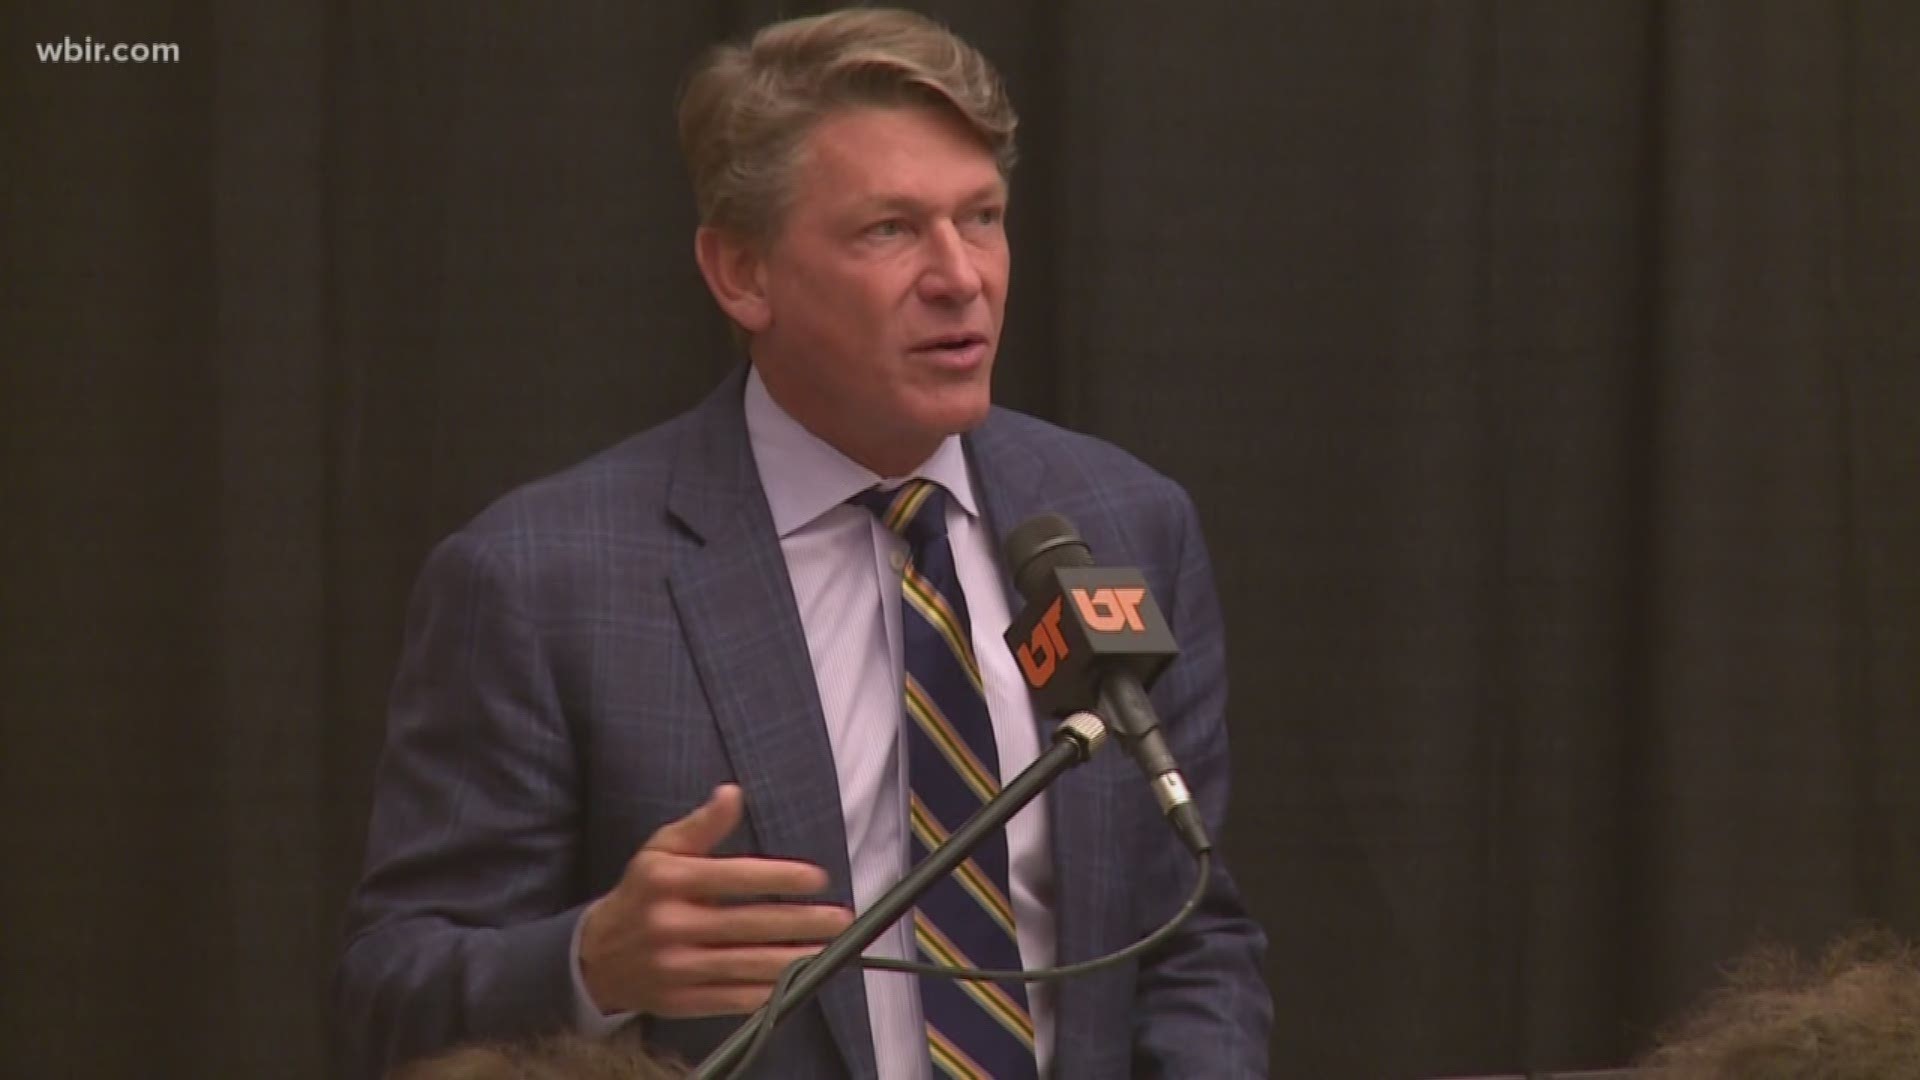 On his first day as the interim president of the UT system, Randy Boyd released his six top priorities.